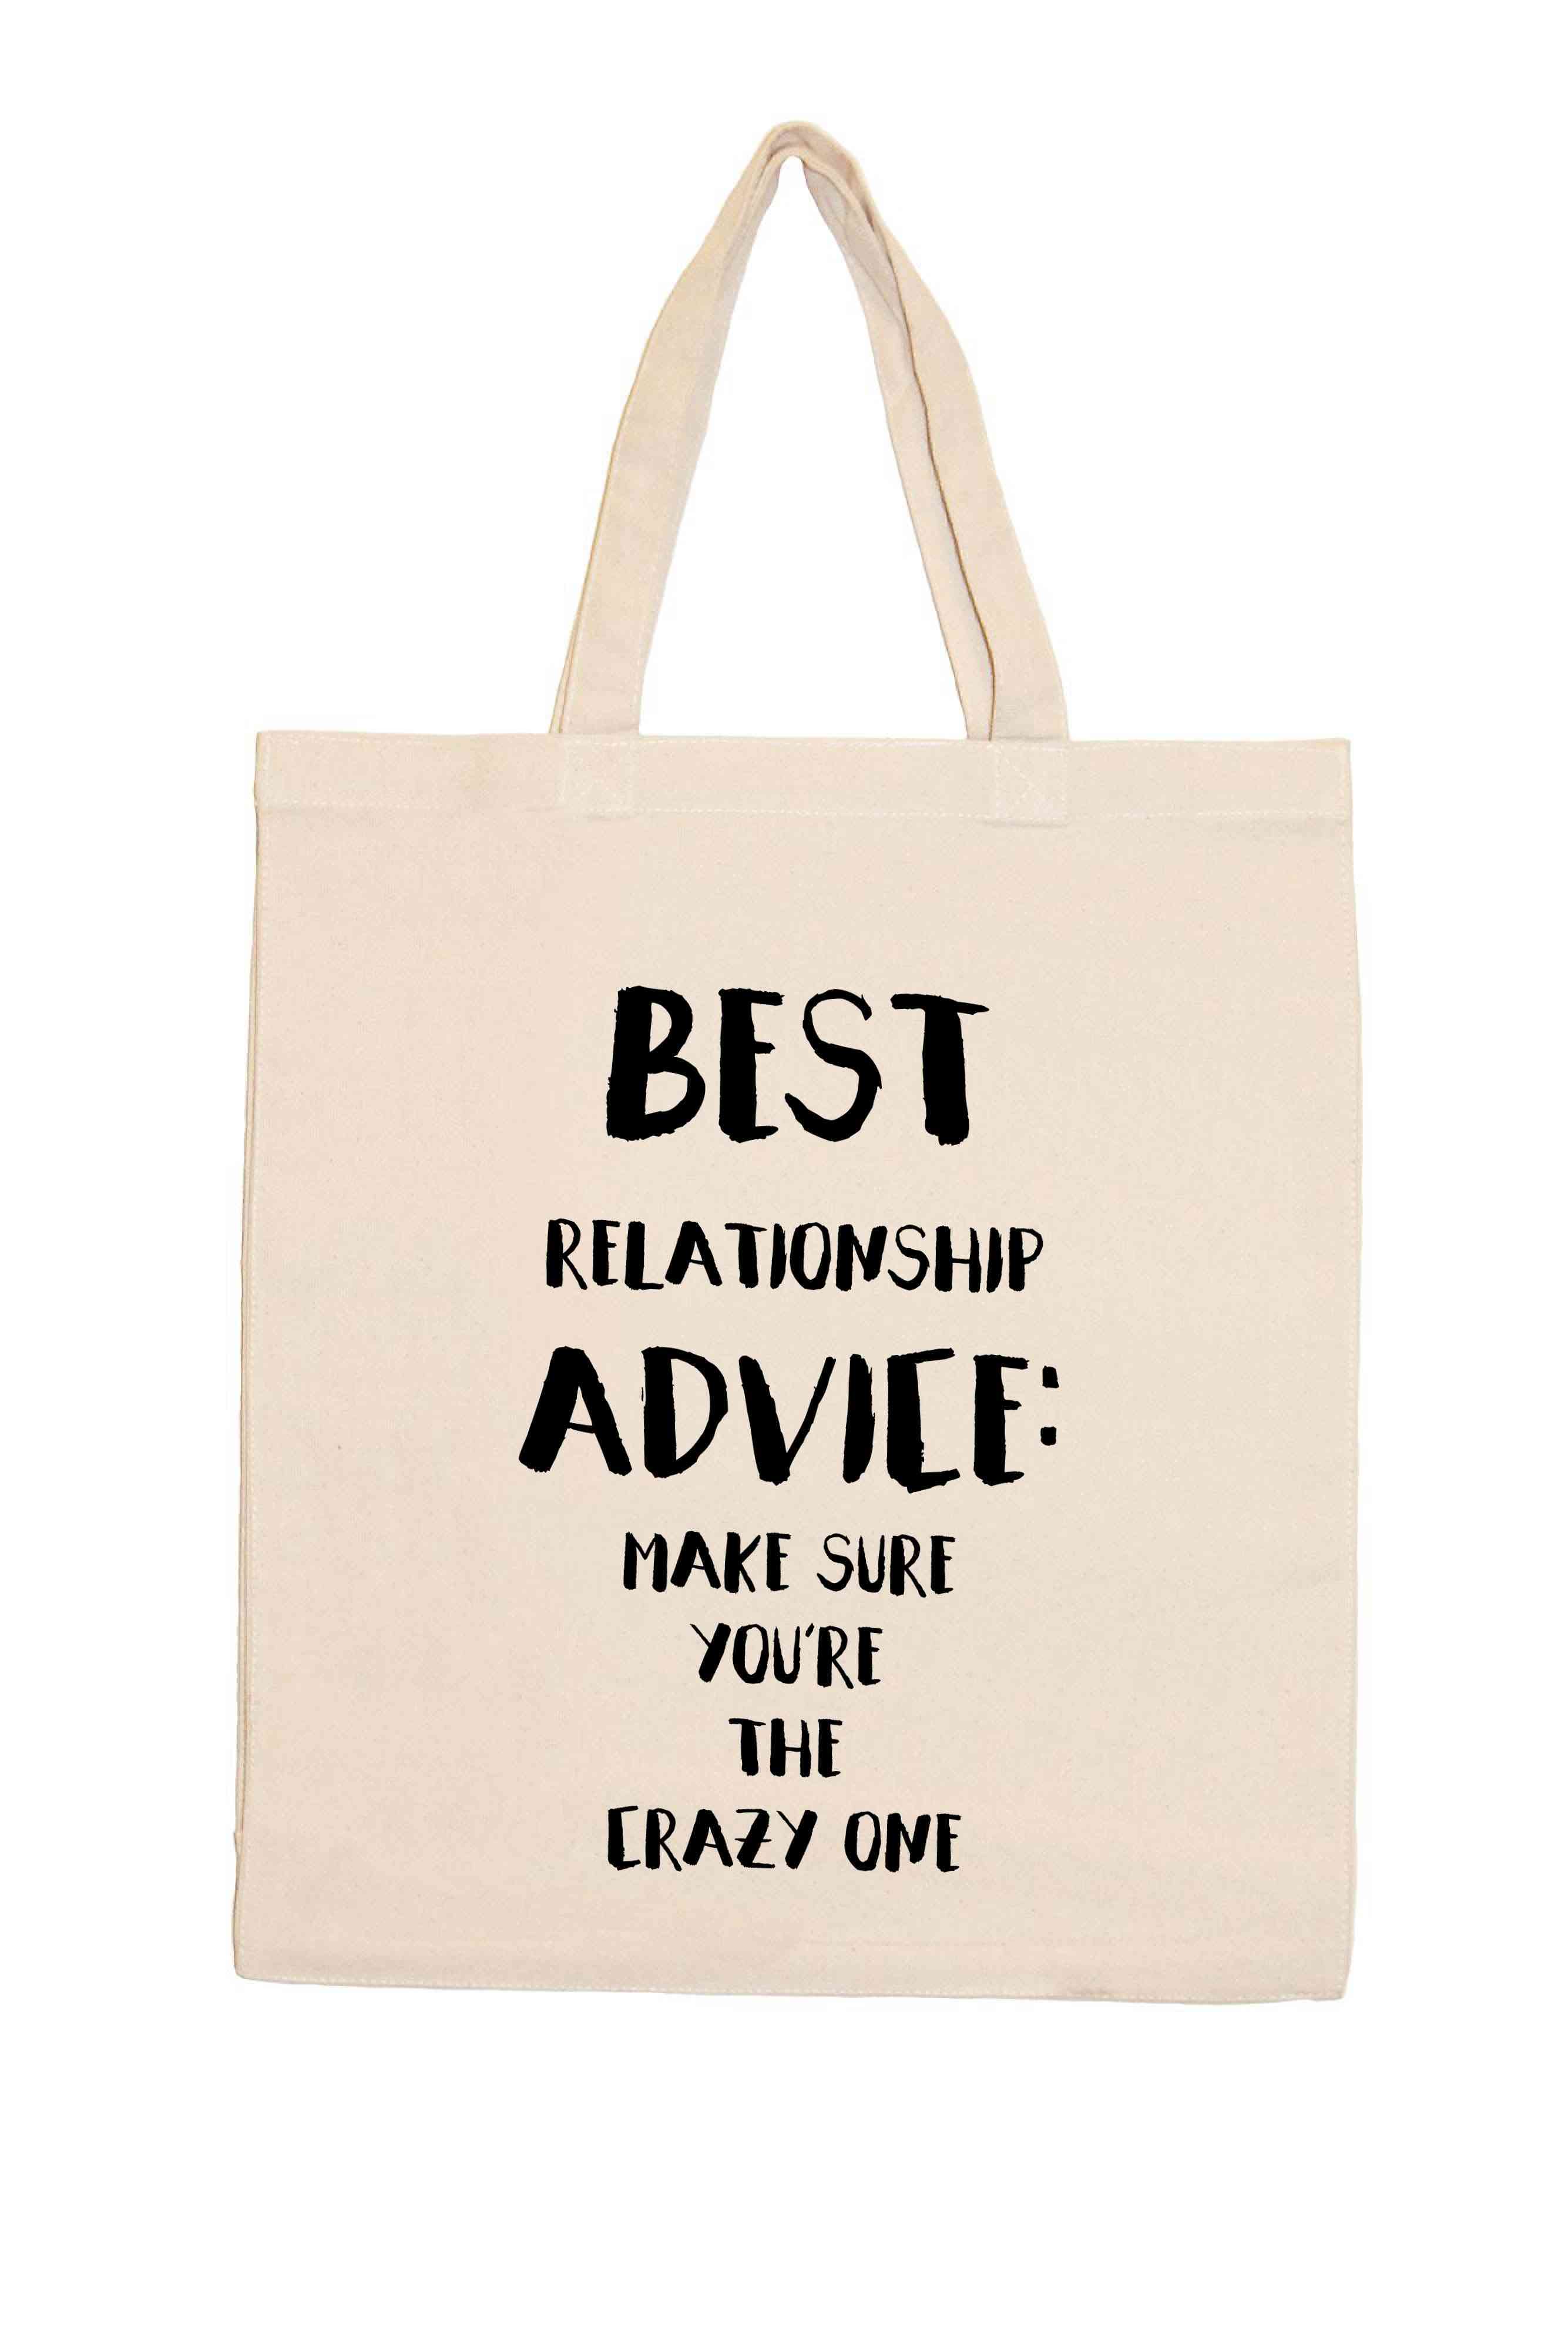 Best Relationship Advice…shopping Totes